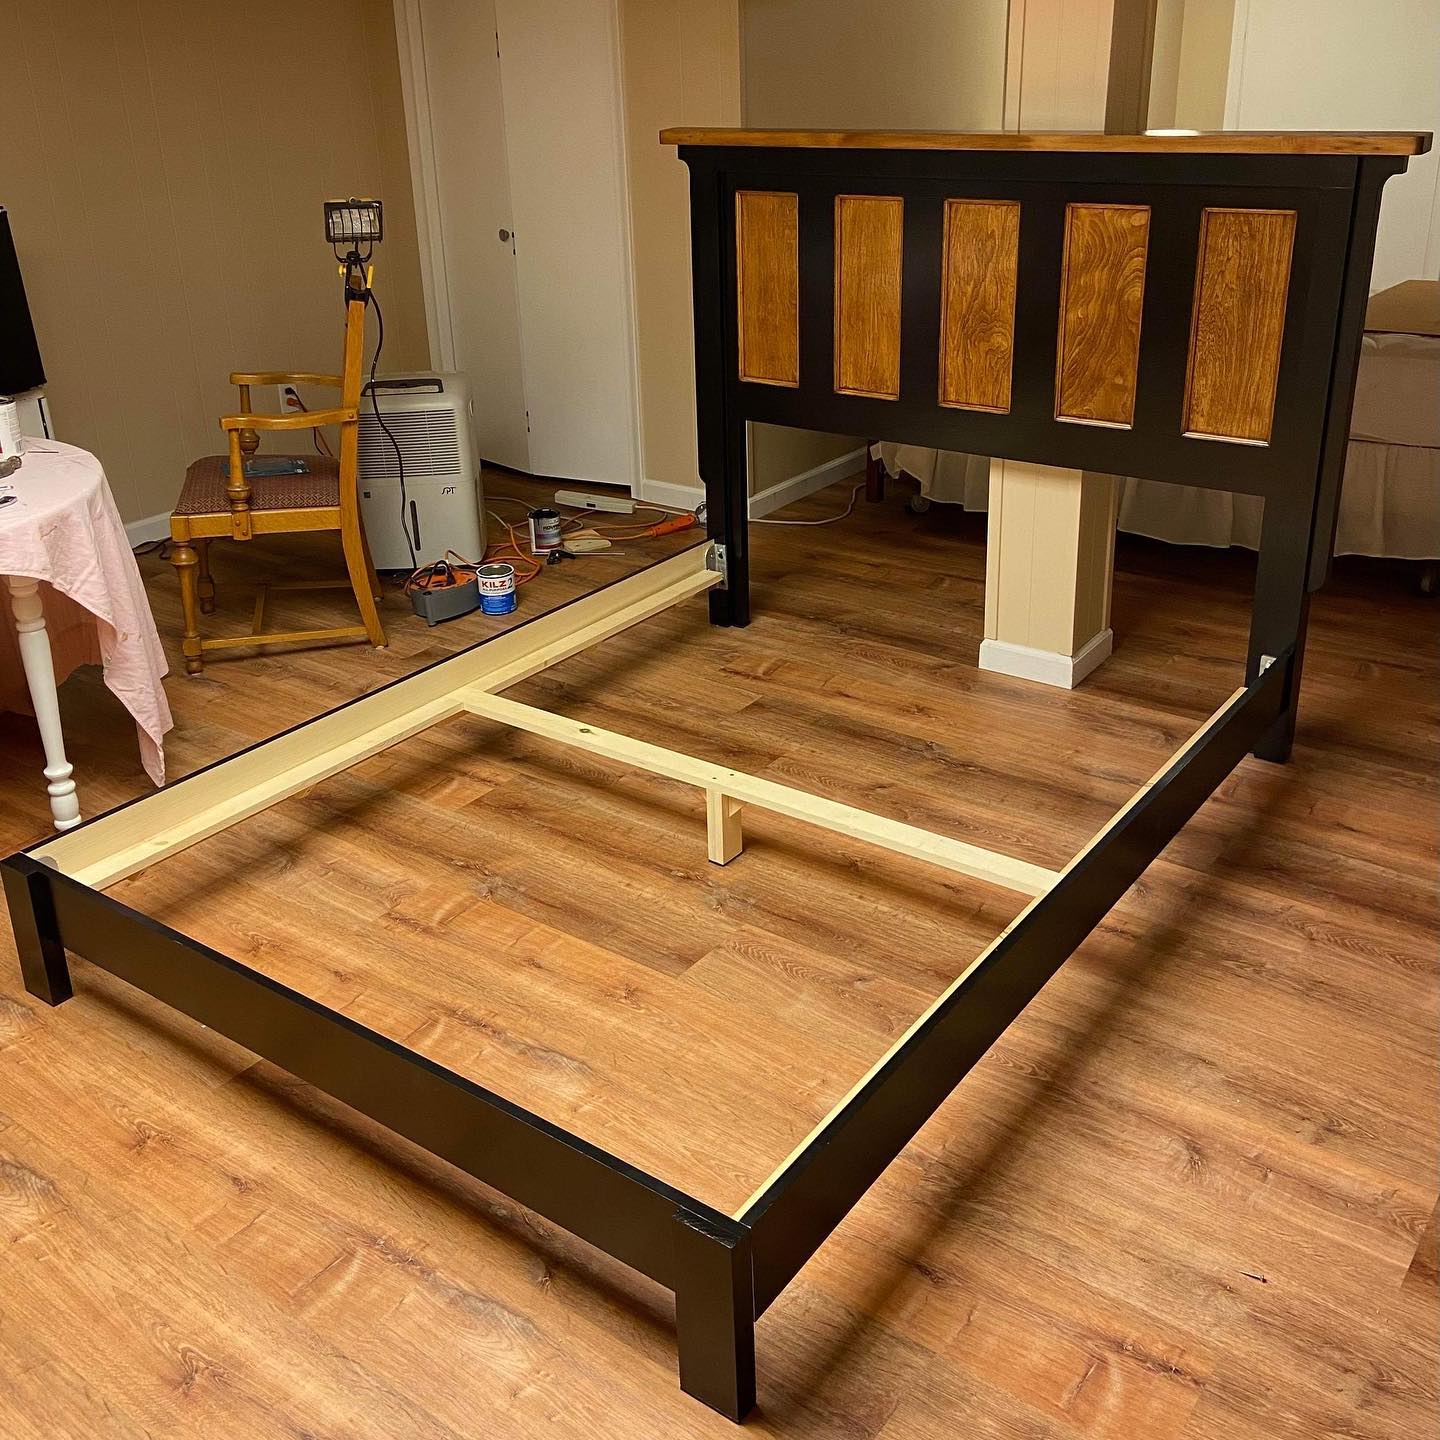 3 Steps To Build Your Next Bed